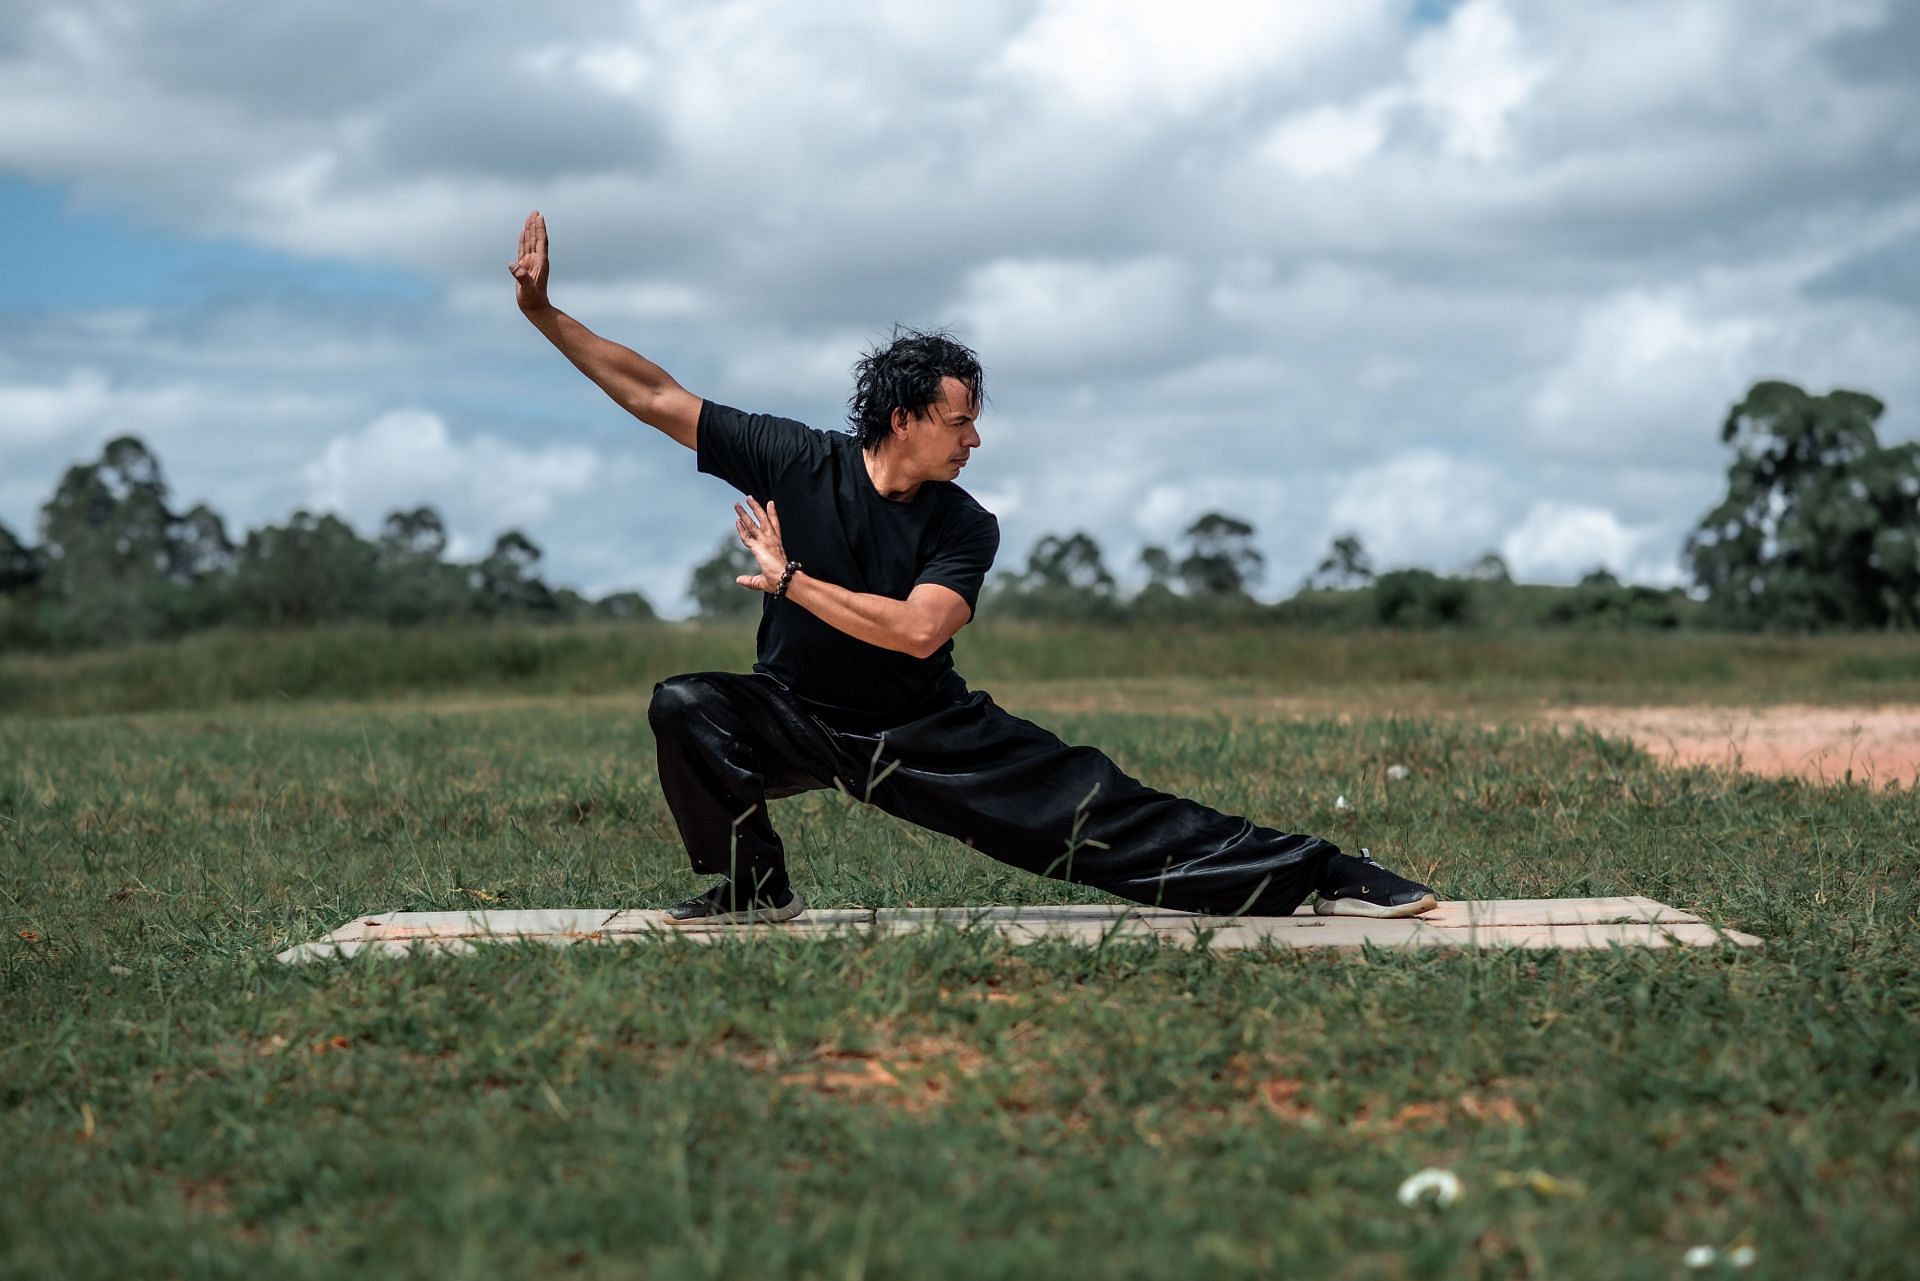 Tai chi for beginners is the best way to get some daily movement. (Image via Pexels / Hebert Santos)